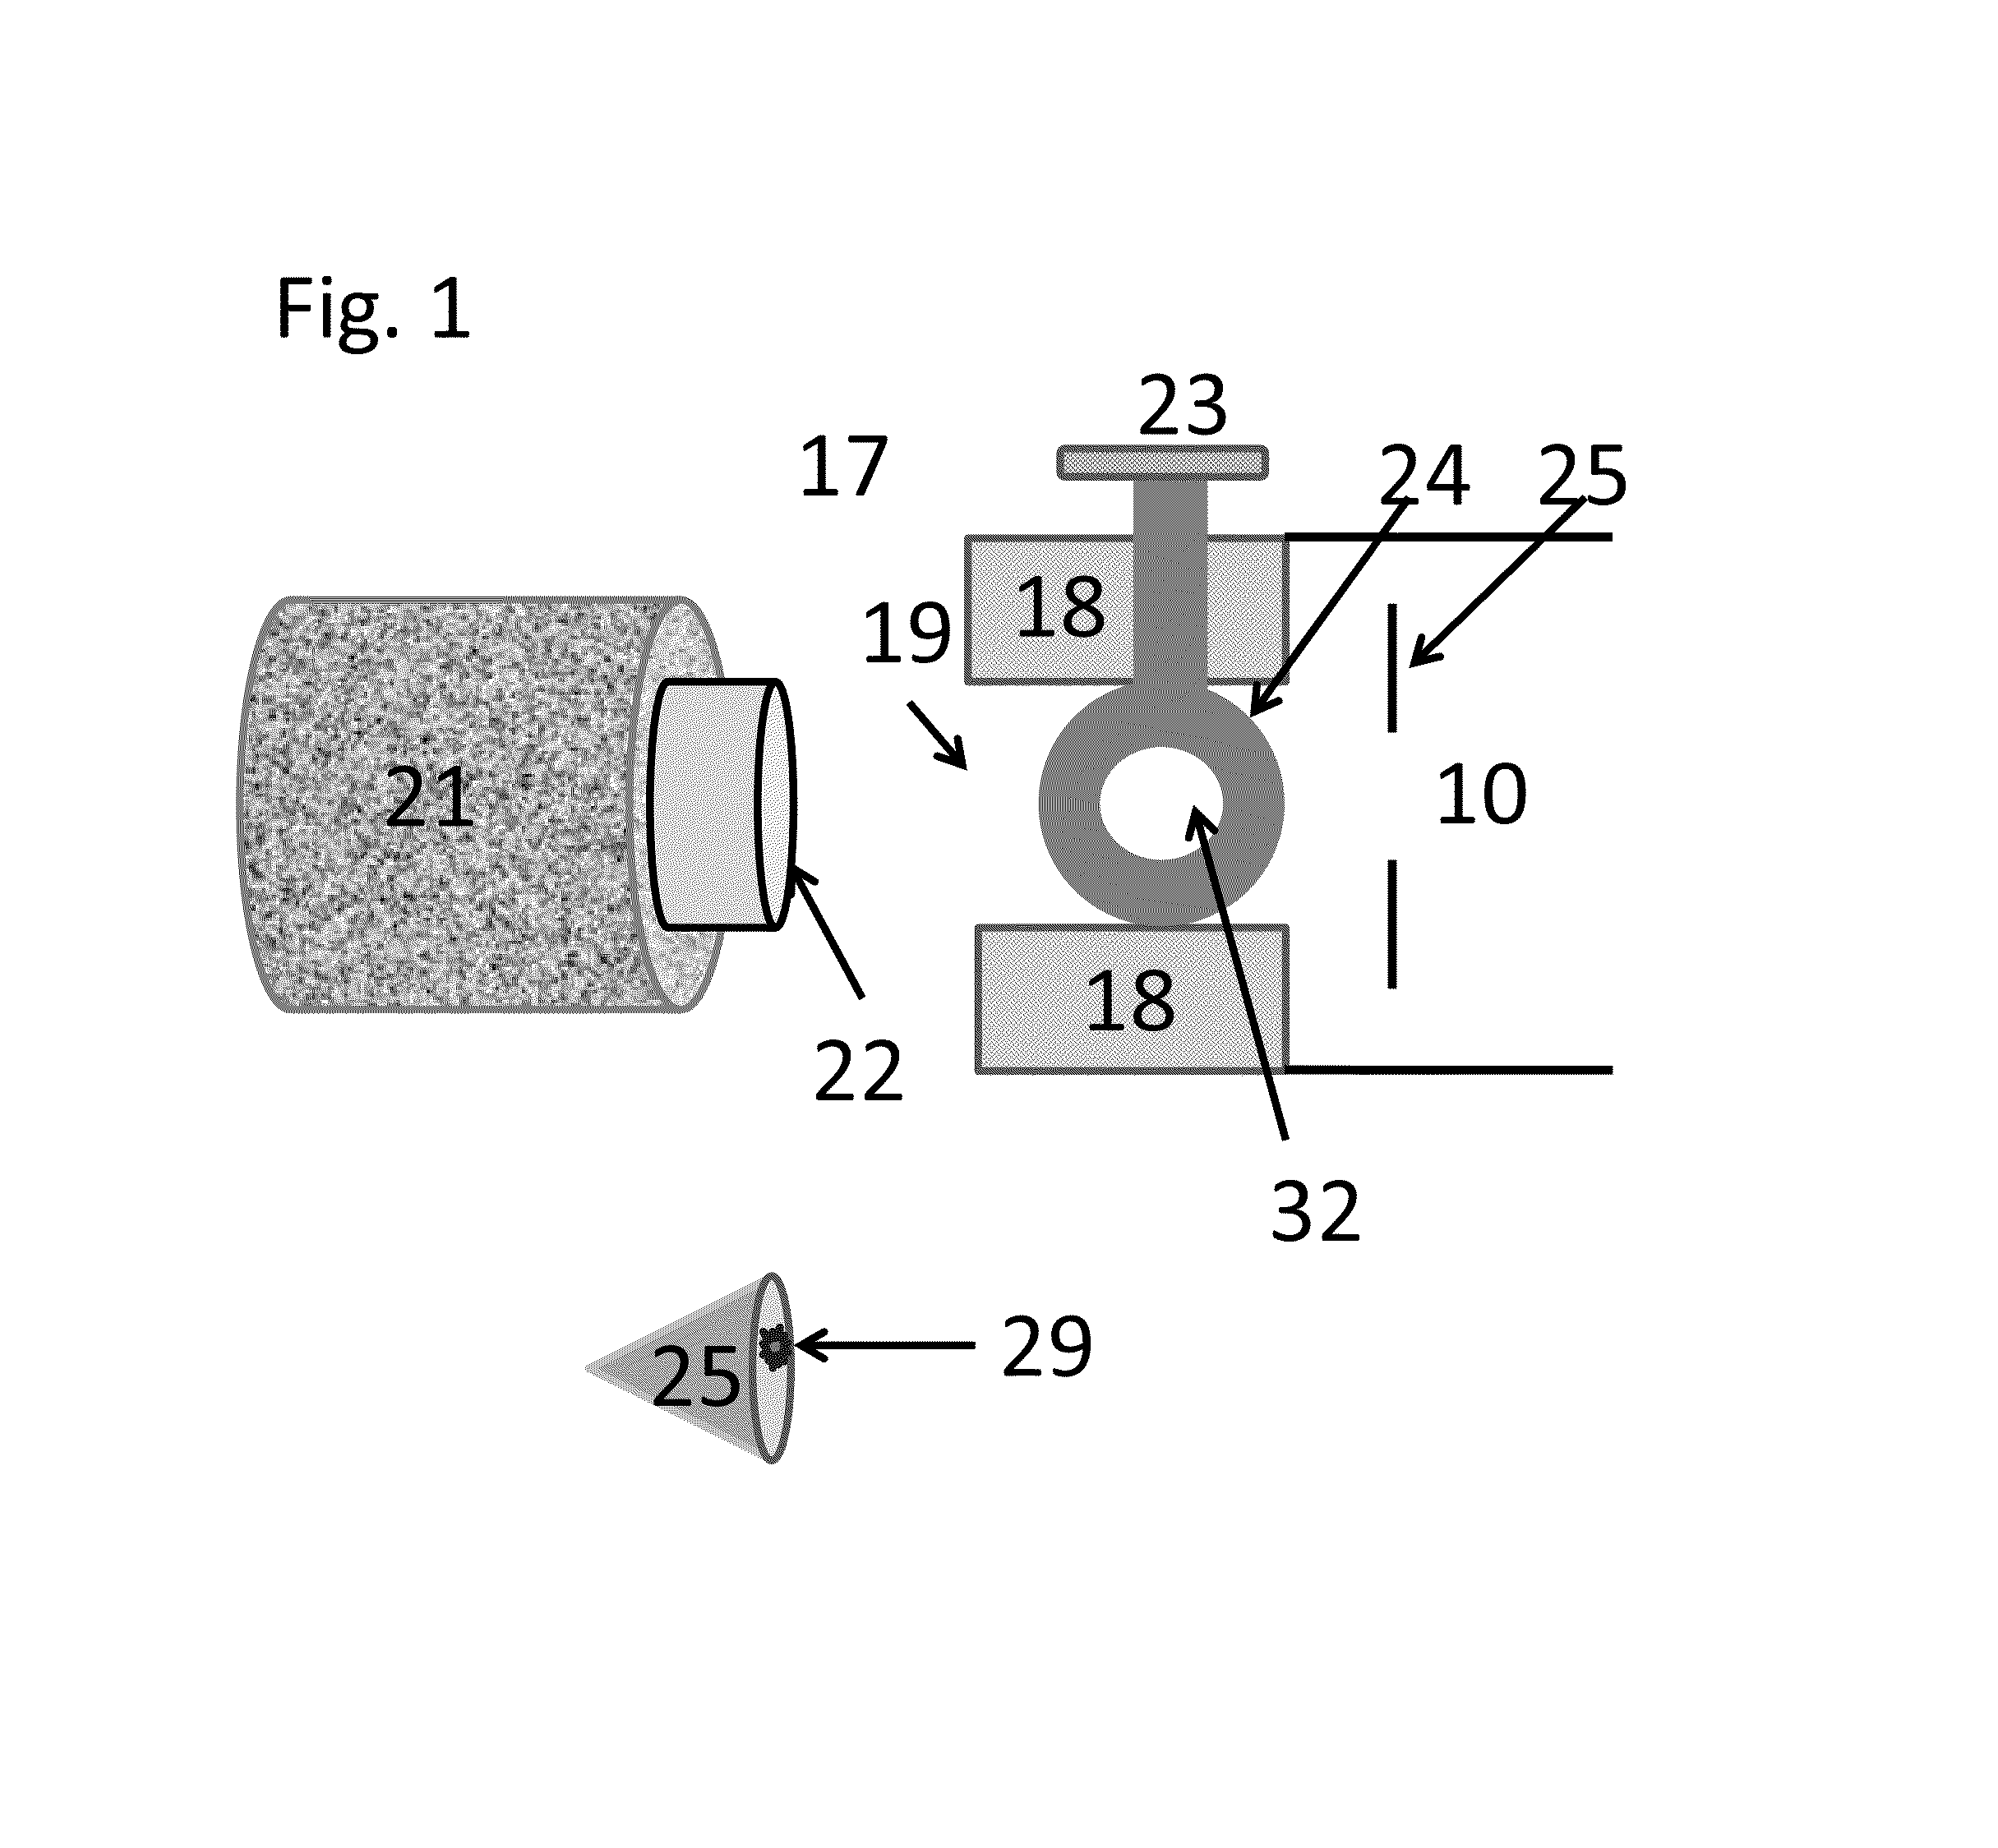 System and methods for ionizing compounds using matrix-assistance for mass spectrometry and ion mobility spectrometry